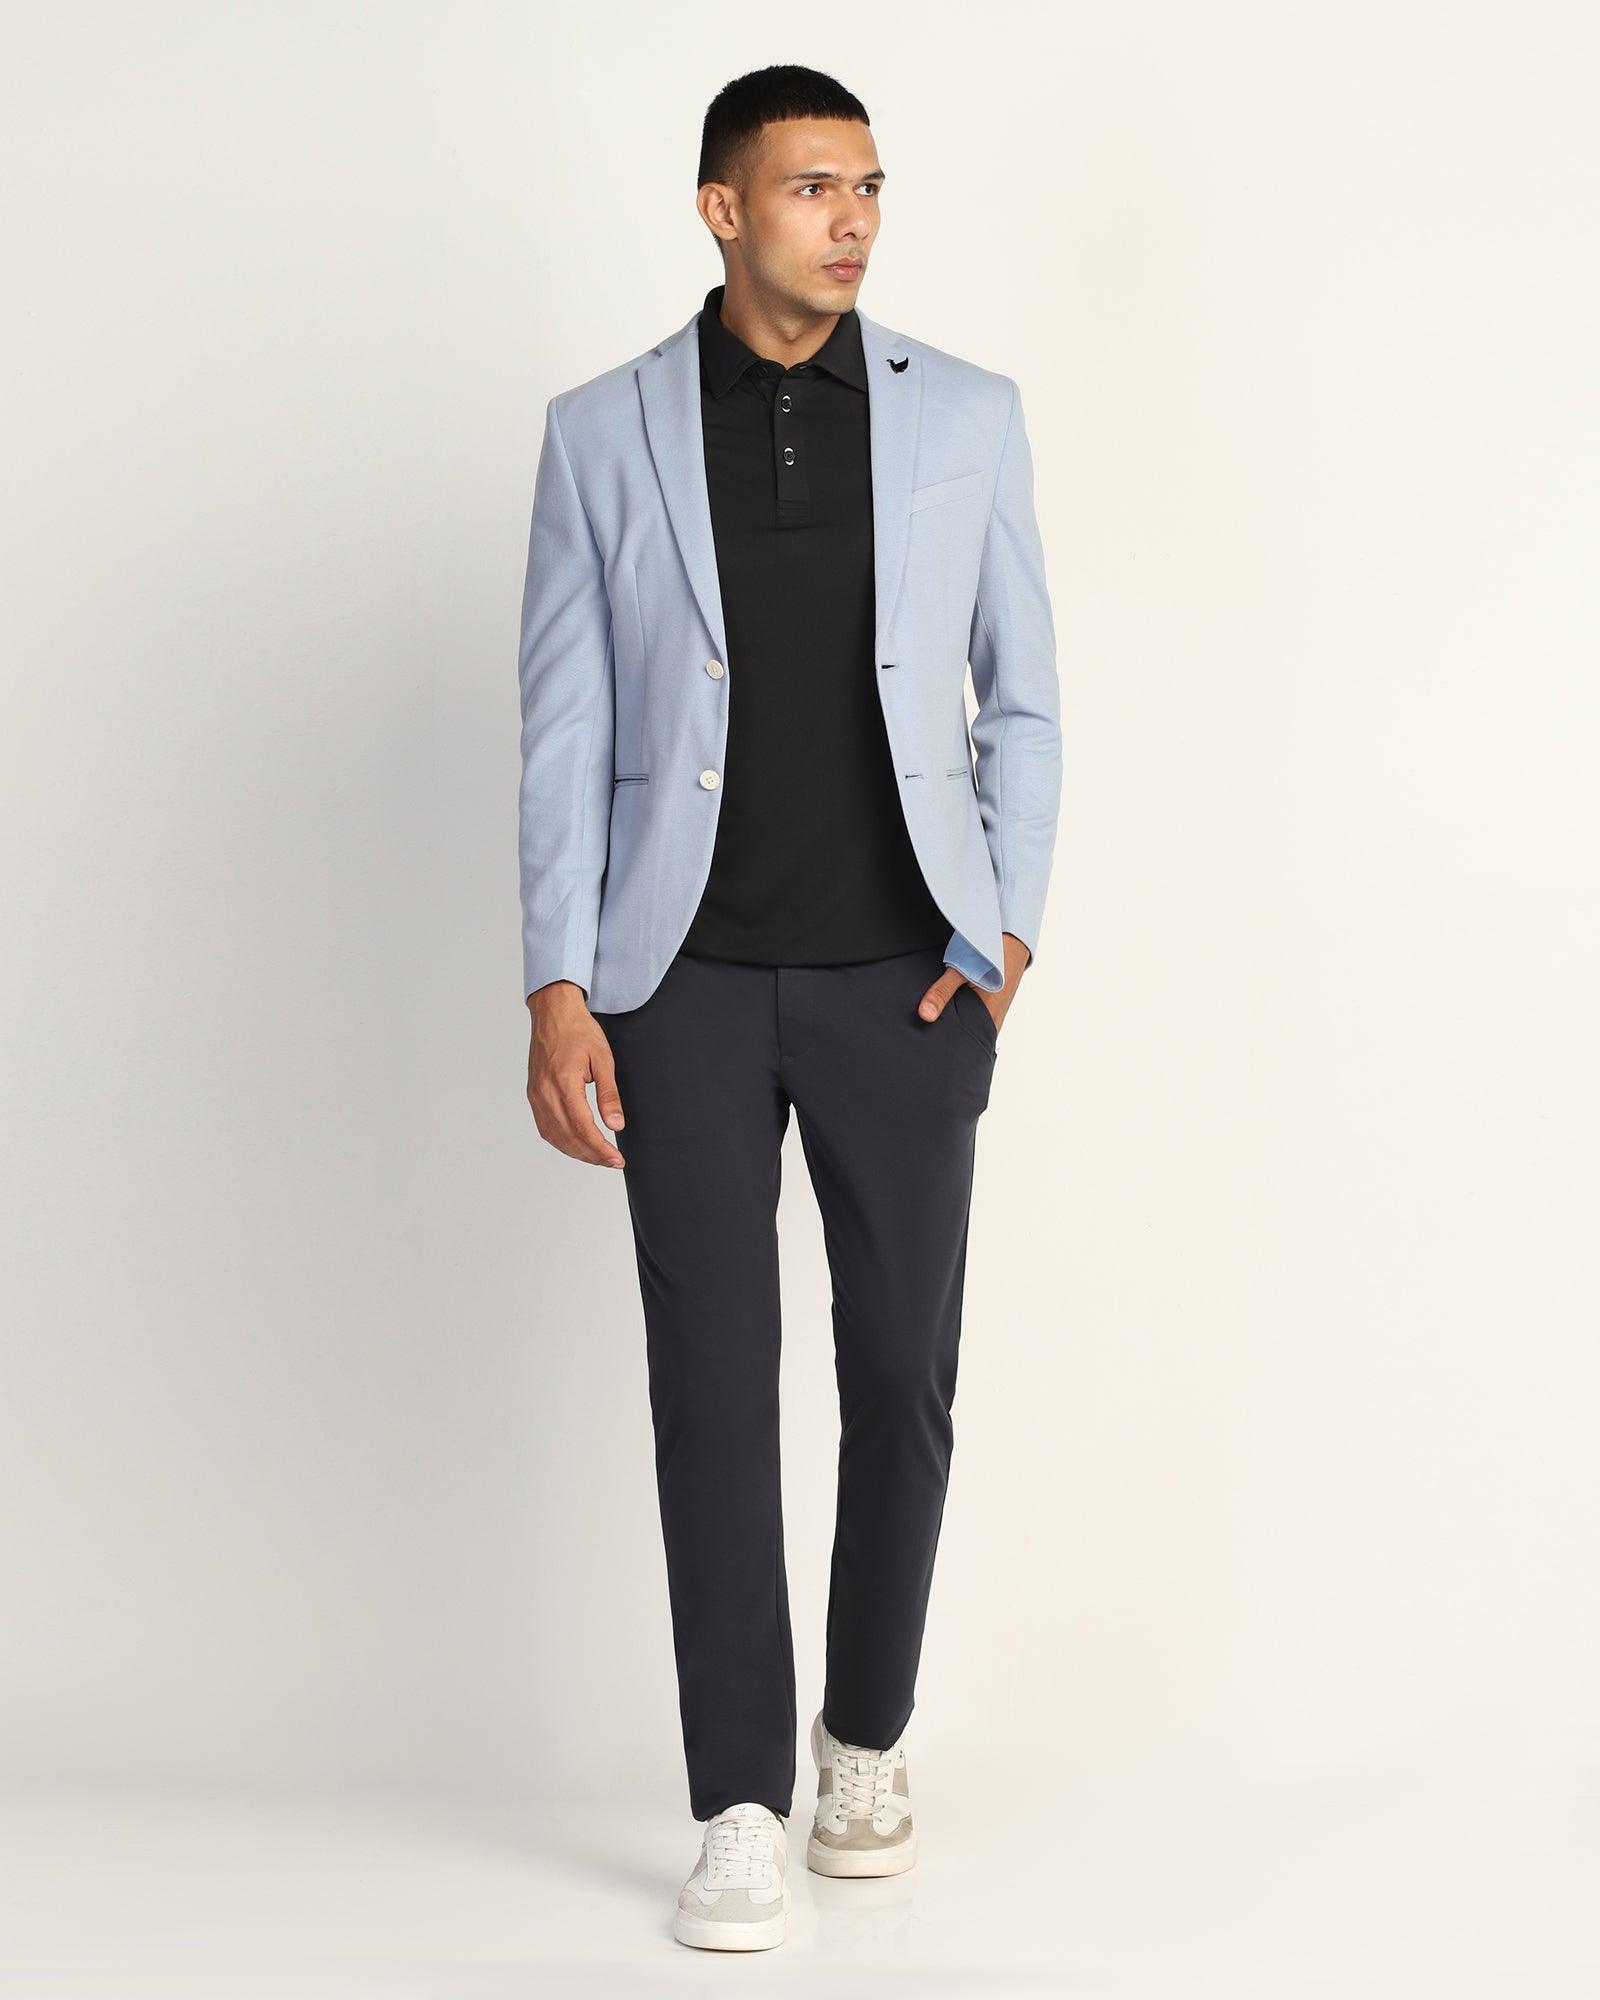 What suits a royal blue blazer? What colour of shirt and jeans? - Quora